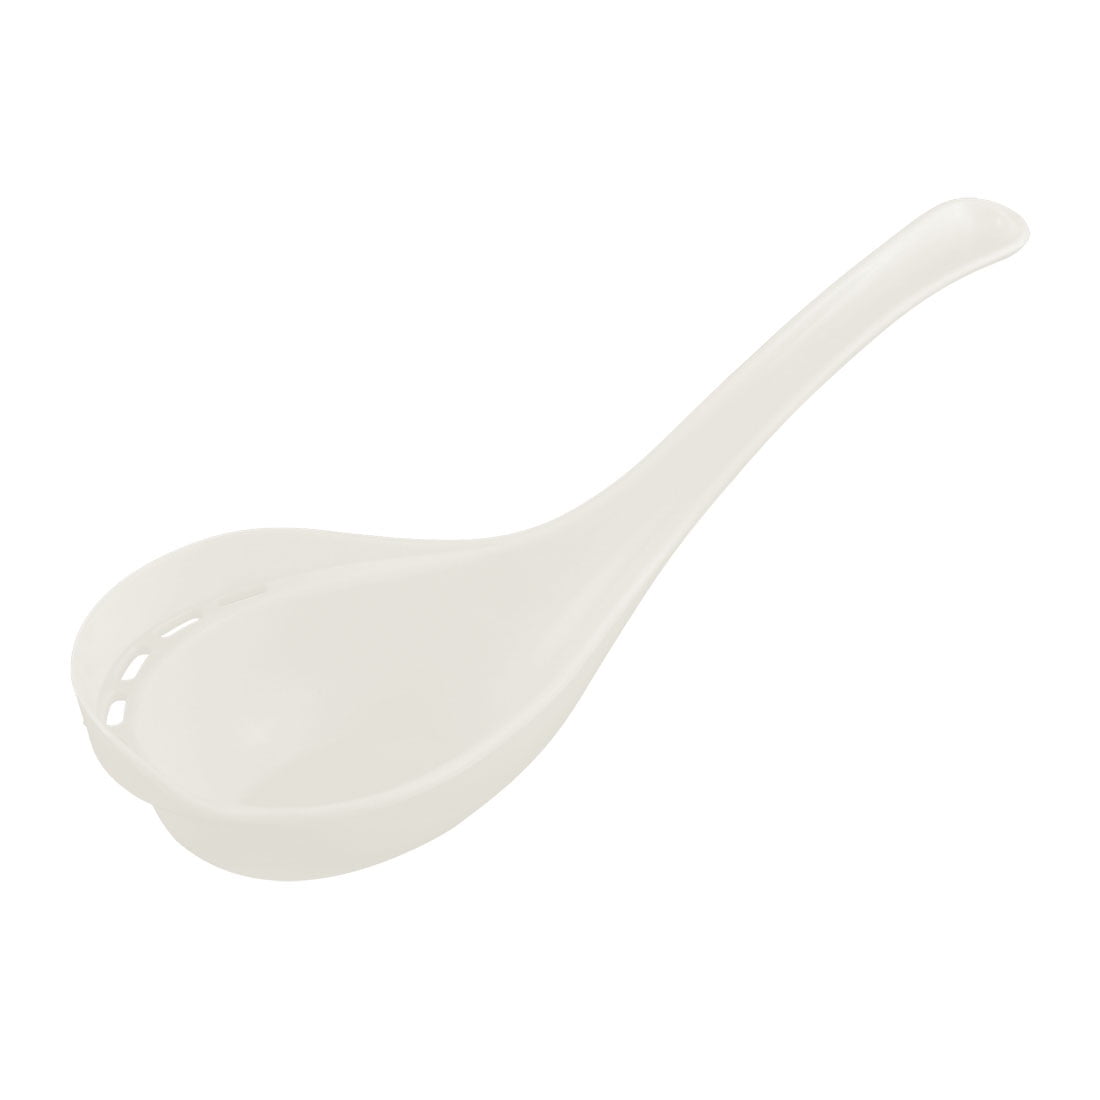 Details about  / Home Flower Print Plastic Soup Rice Ladle Serving Spoon Skimmer White